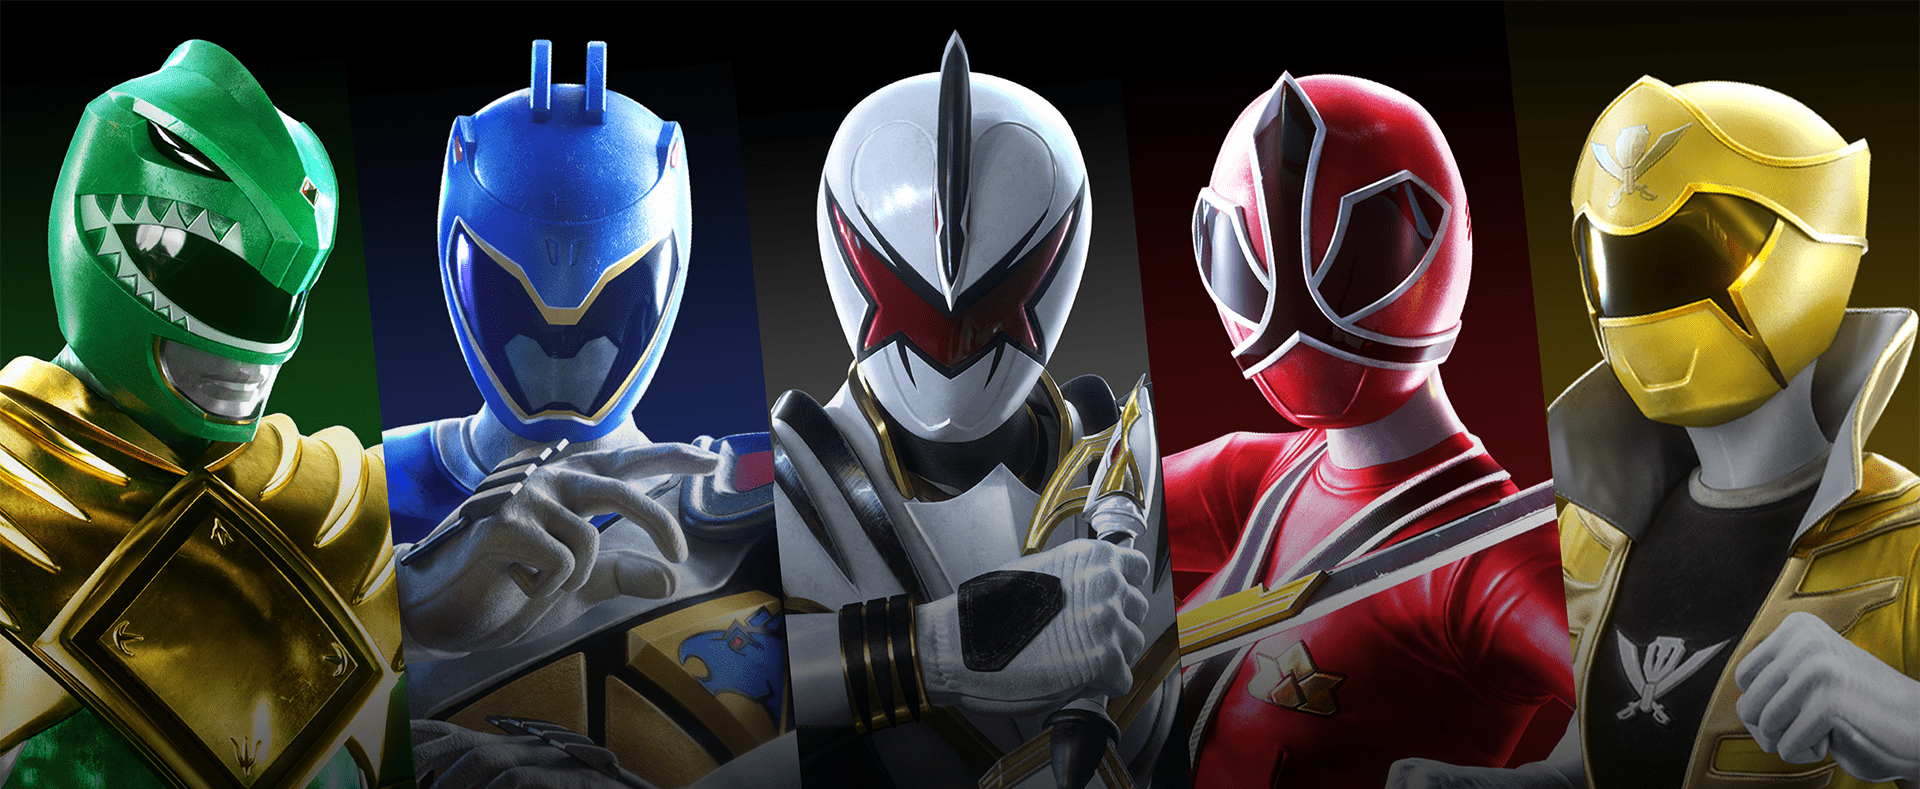 Red power ranger Wallpapers Download | MobCup